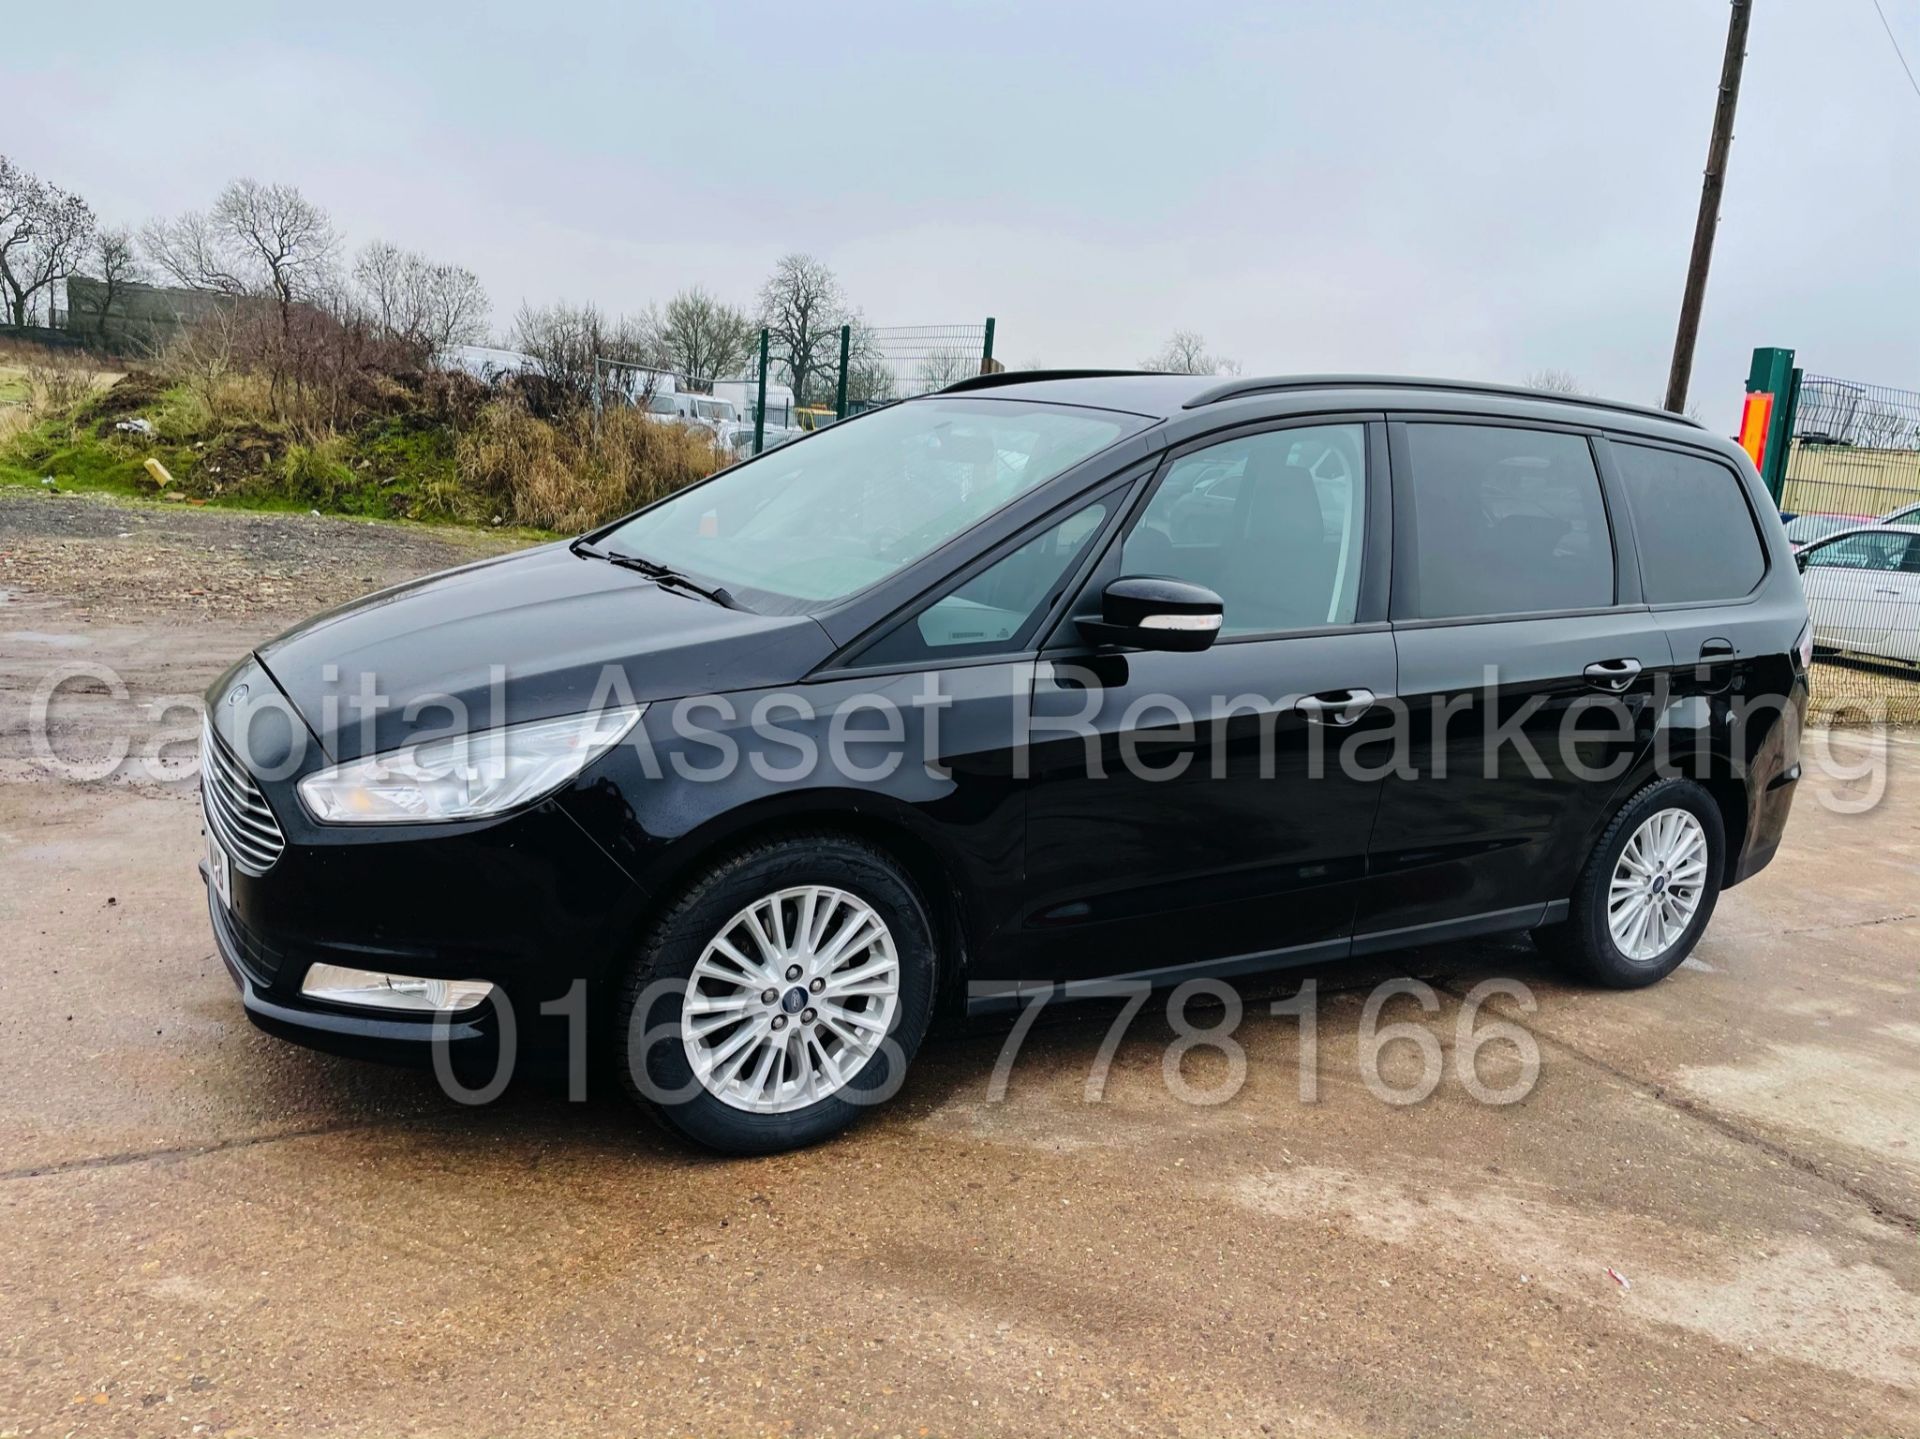 FORD GALAXY *ZETEC EDITION* 7 SEATER MPV (2017 - EURO 6) '2.0 TDCI - AUTO' (1 OWNER FROM NEW) - Image 7 of 48